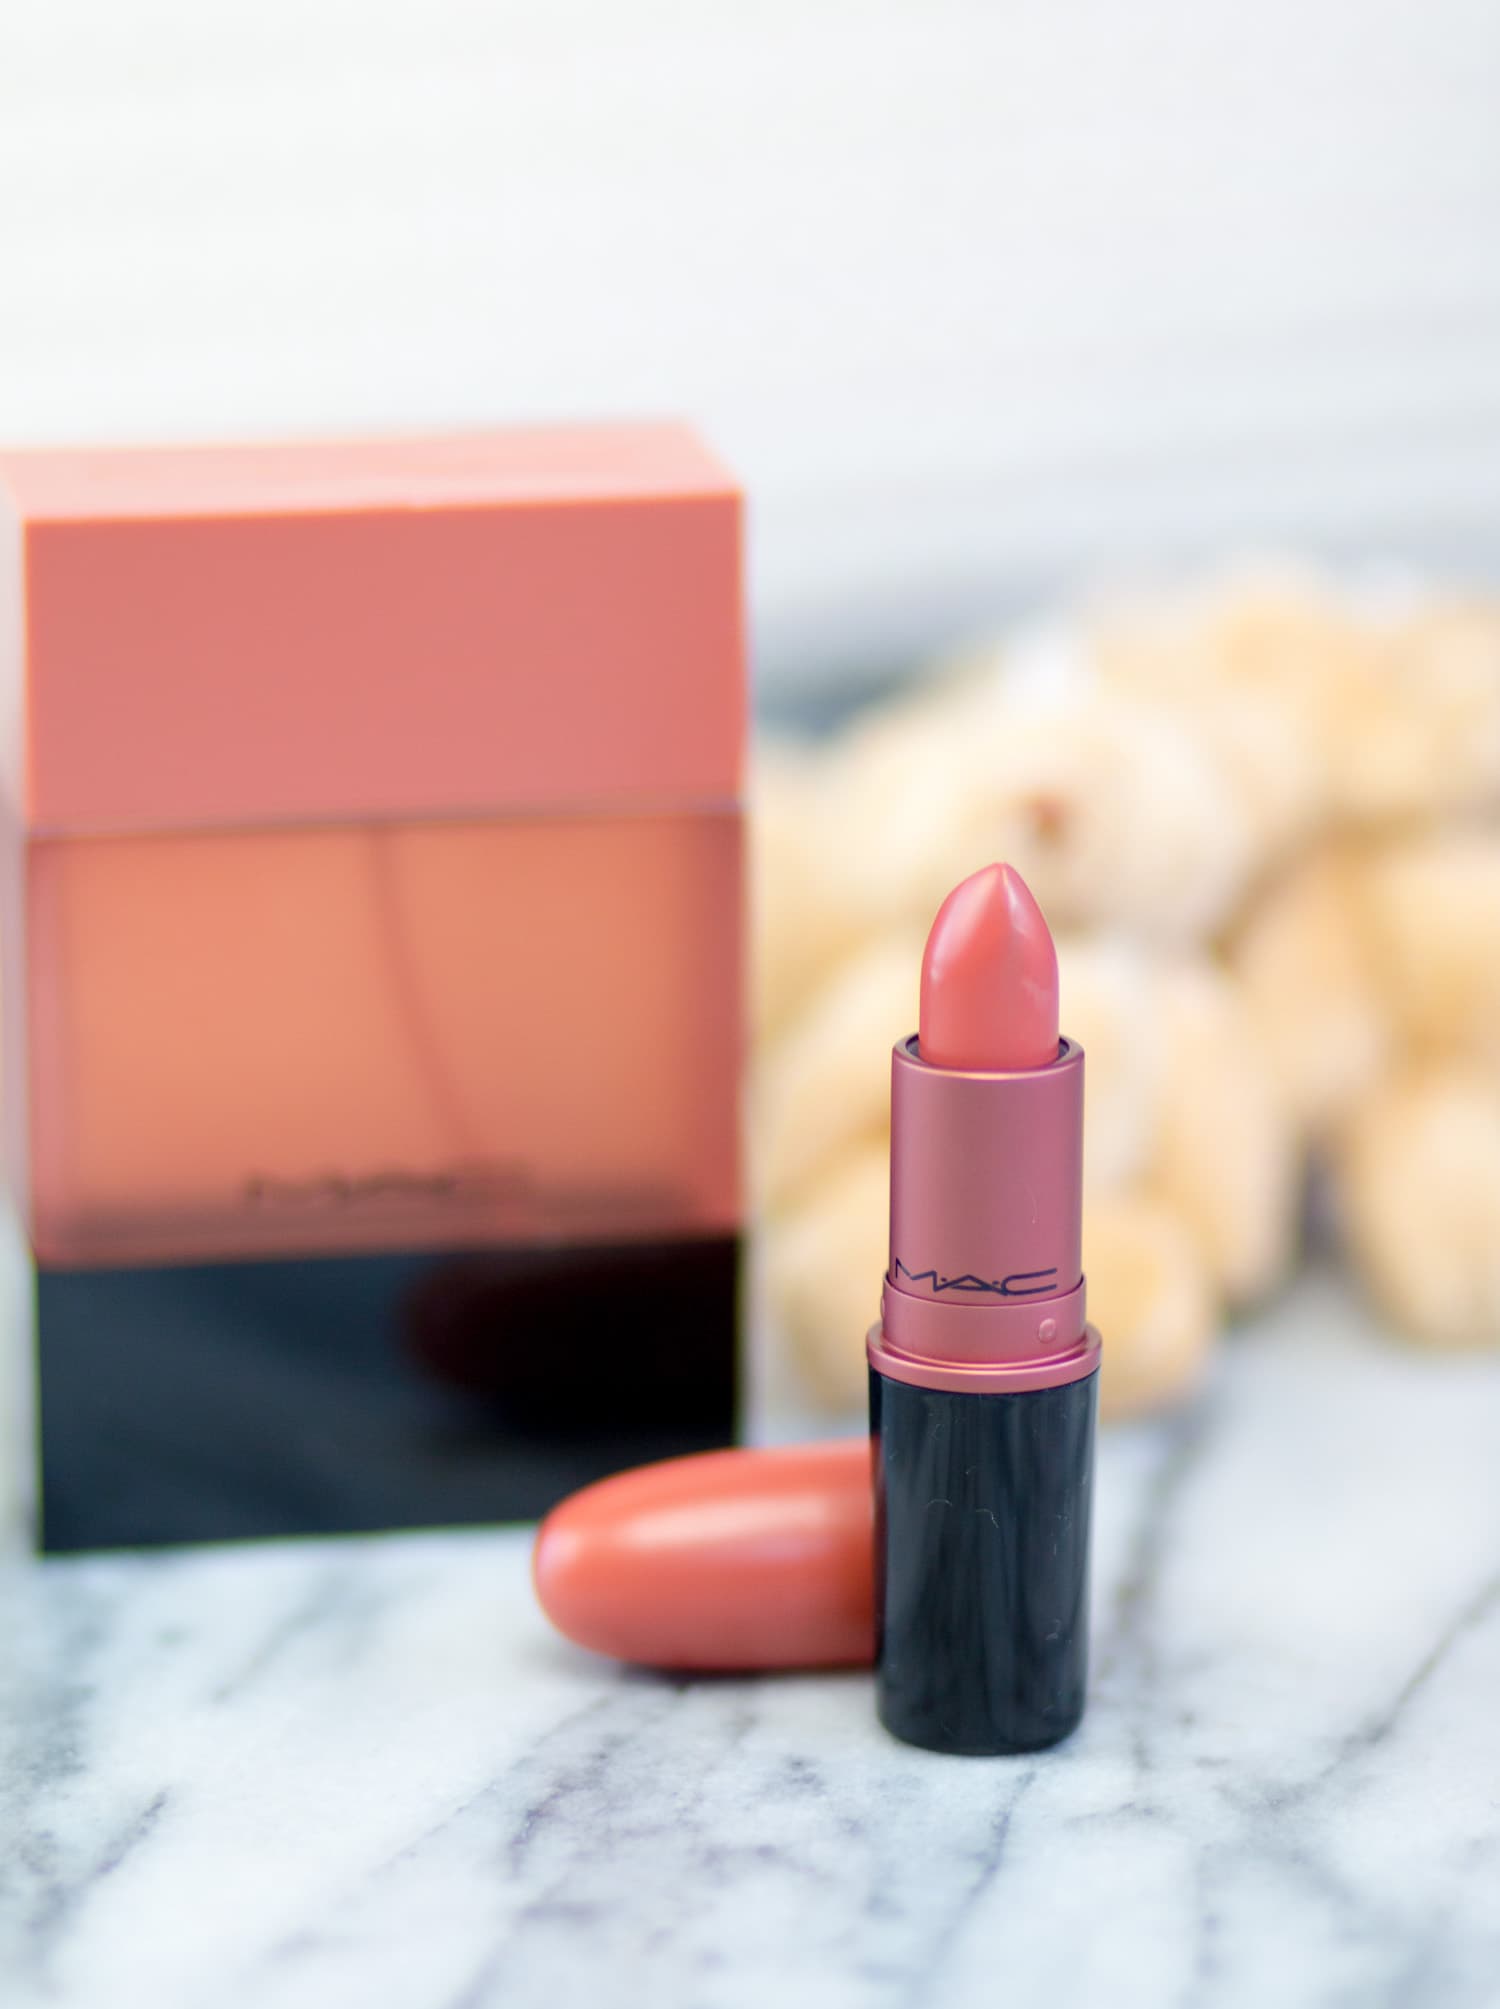 A full review of the MAC Shadescents Velvet Teddy perfume and lipstick by Orlando, Florida, beauty blogger Ashley Brooke Nicholas